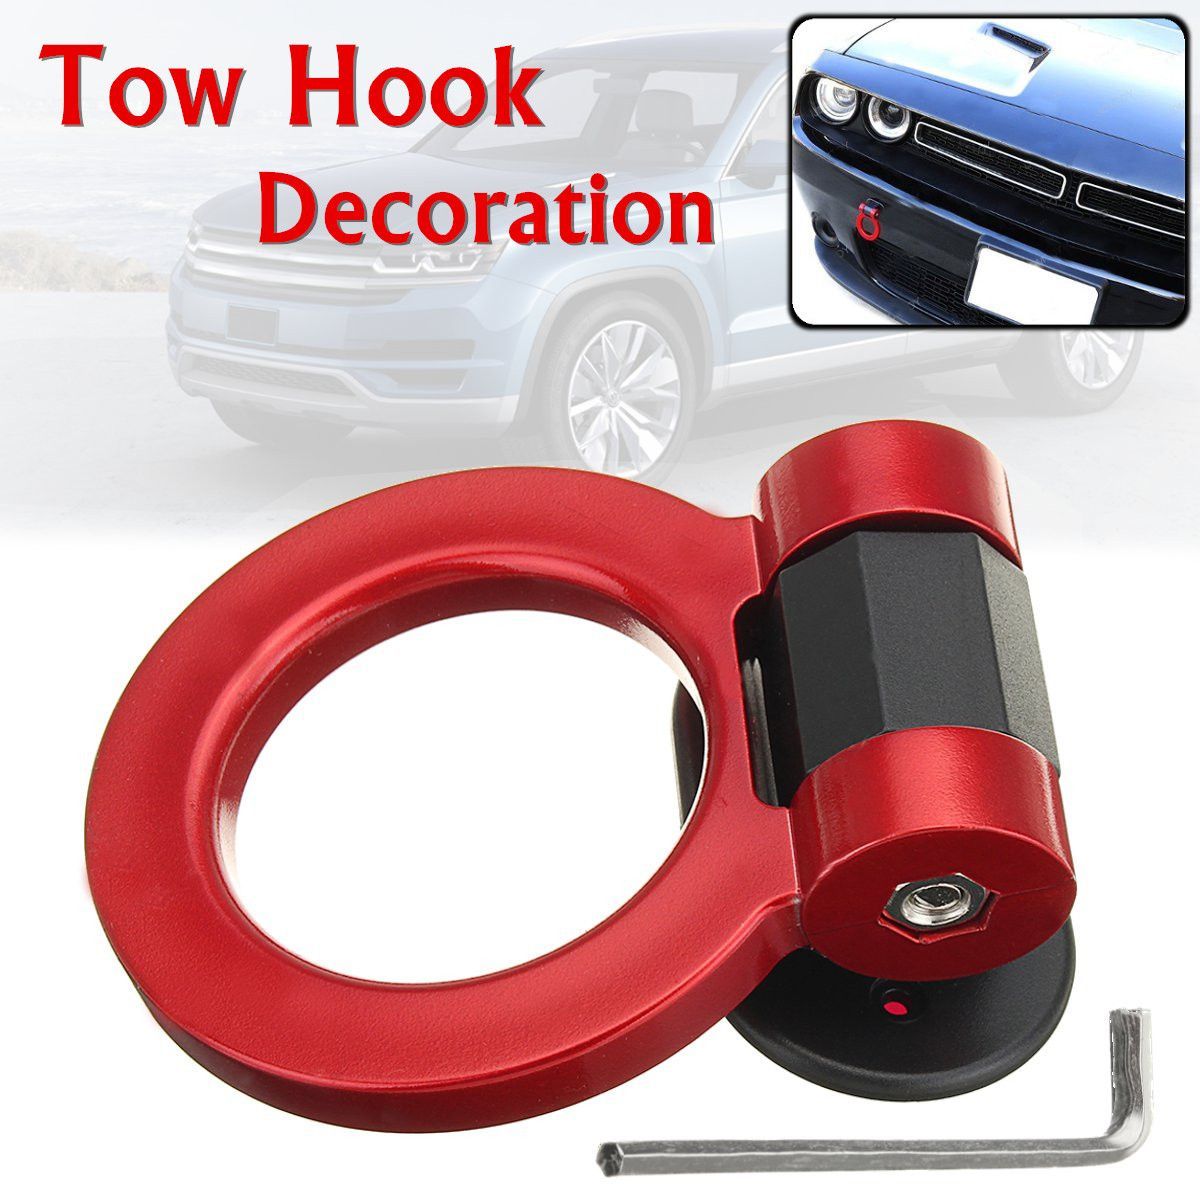 Universal-Ring-Track-Racing-Style-Tow-Hook-Look-Decoration-for-Cars-SUV-Trucks-1228490